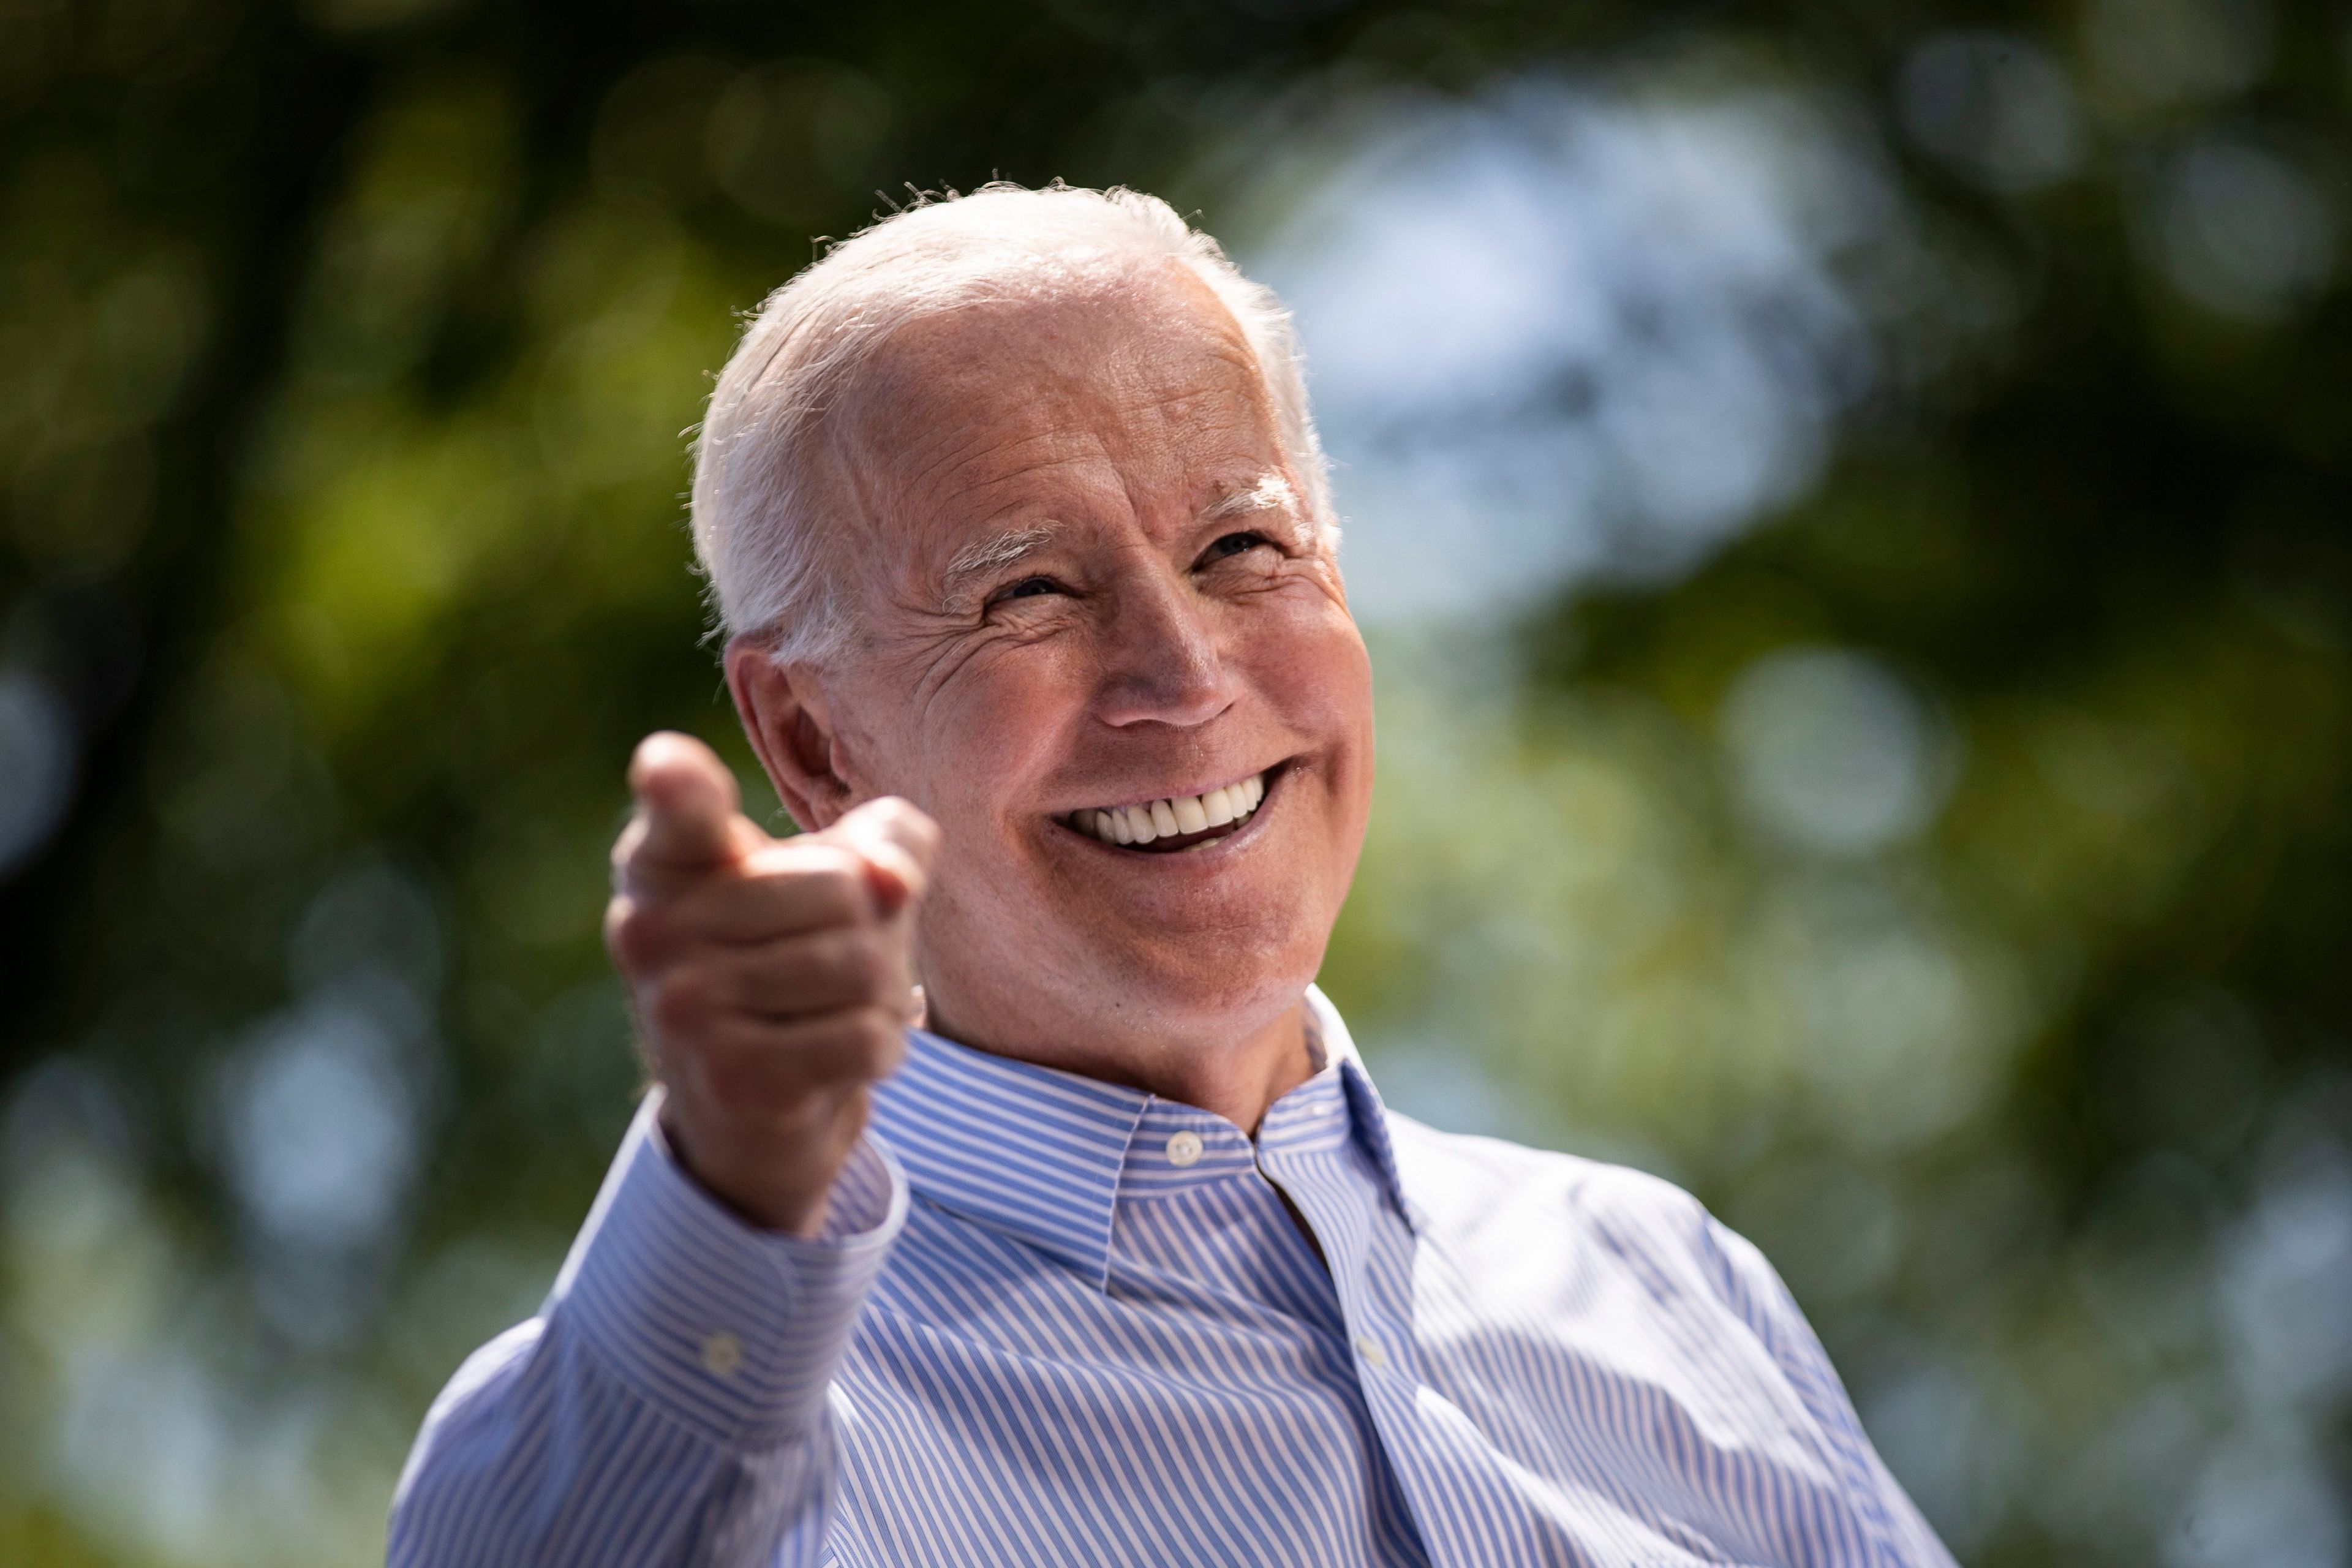 Biden speaks during a campaign kickoff rally on May 18, 2019 in Philadelphia, Penn. (Drew Angerer/Getty Images)